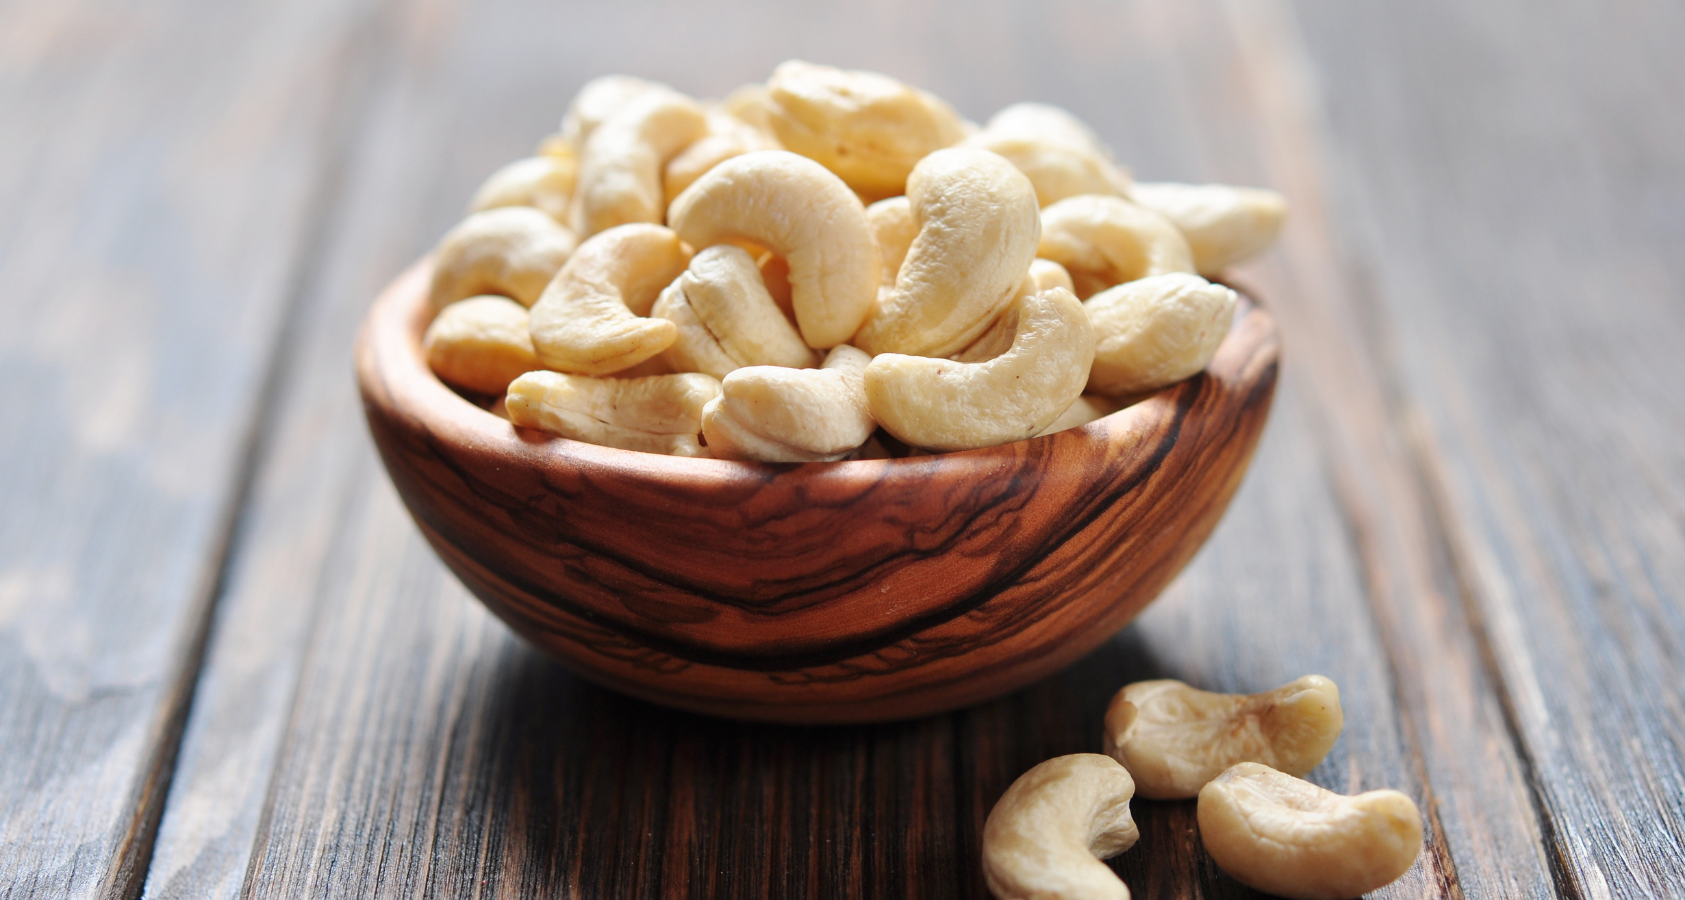 Can Dogs Eat Cashews? Are They Safe?